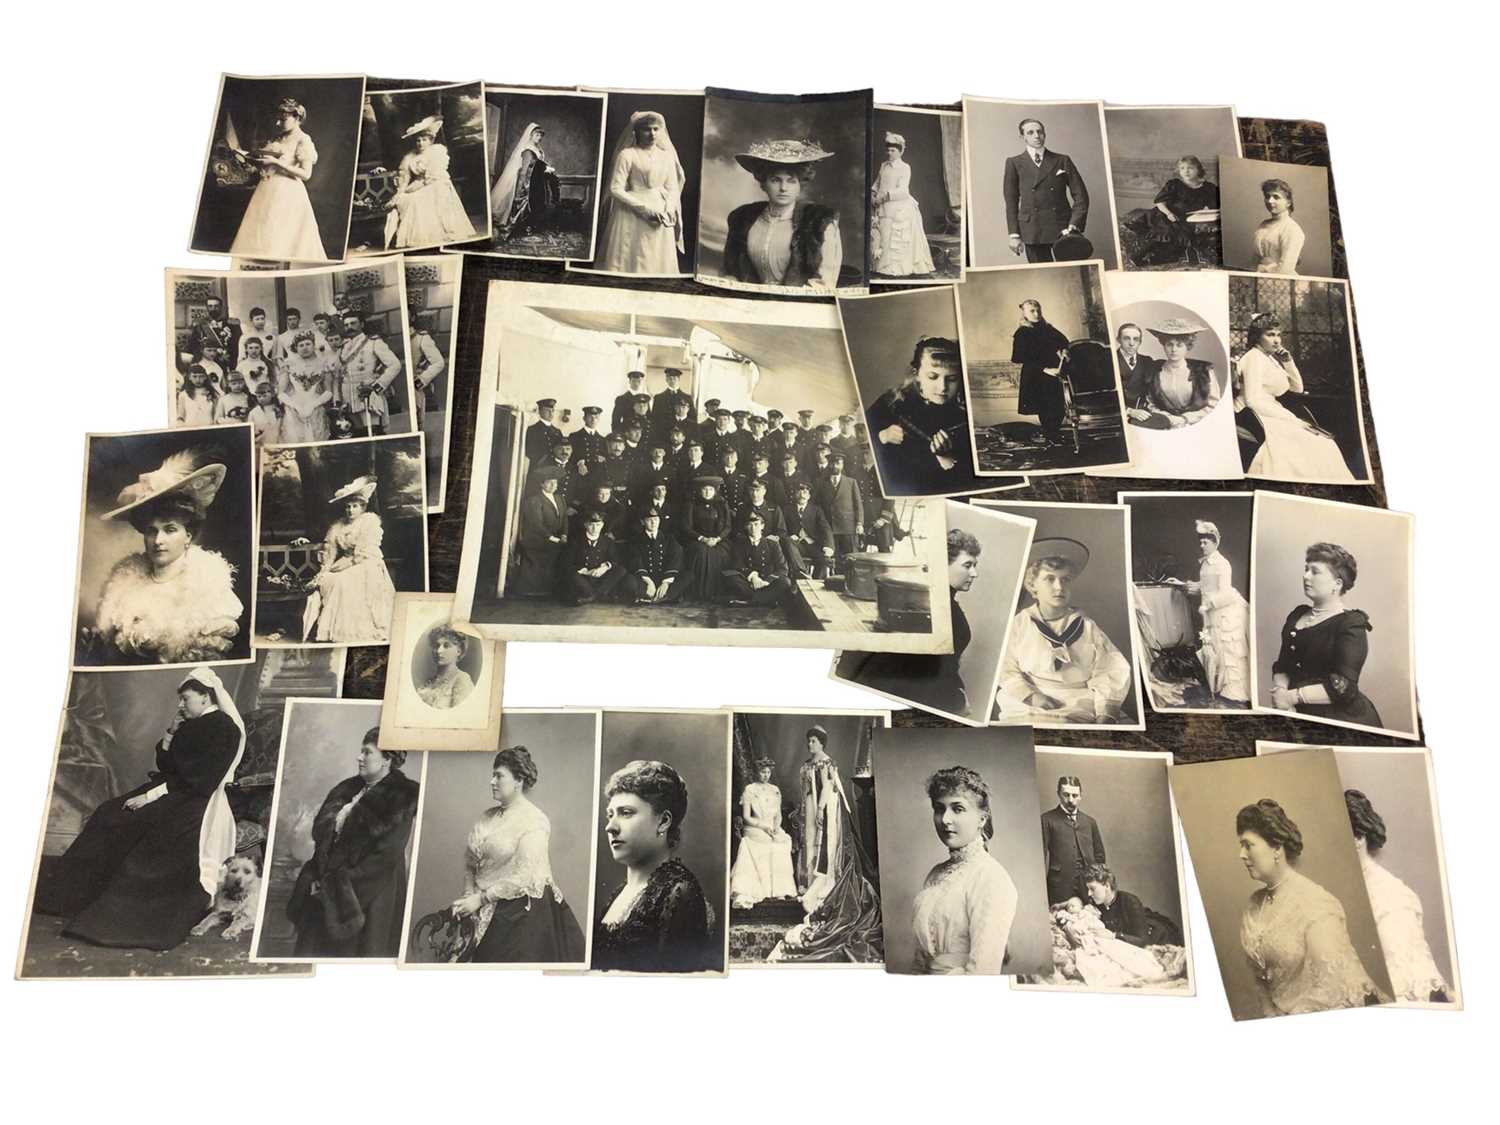 Lot 31 - The family of H.M.Queen Victoria, collection of portrait photographs including Princess Beatrice and Prince Henry of Battenberg on their wedding day at Osborne, July 25th 1885, and various portaits...